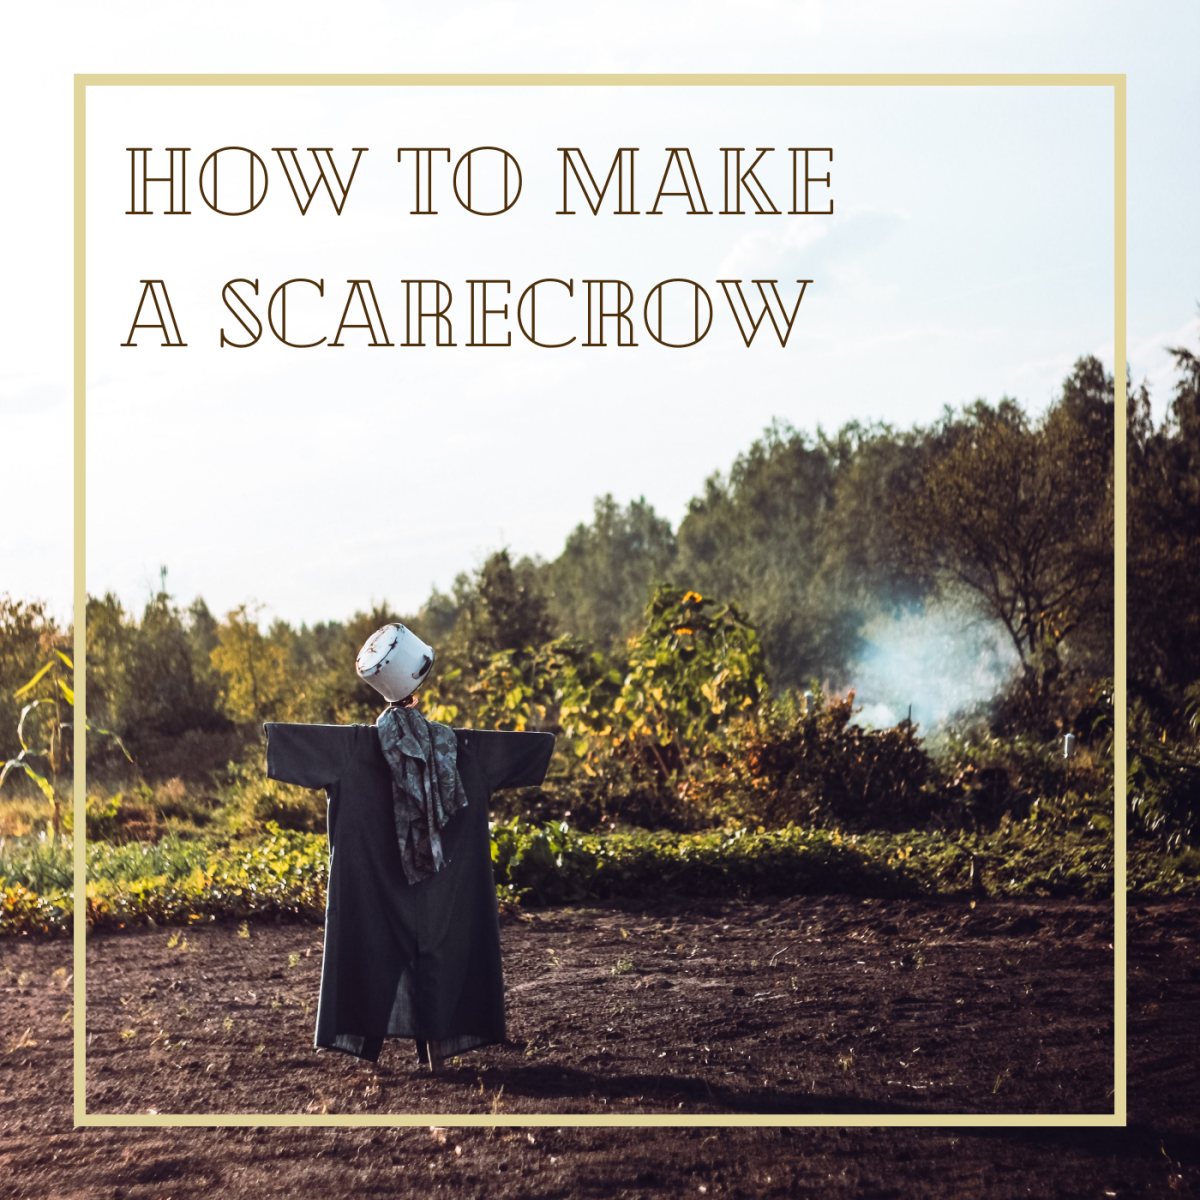 Scarecrows are great for keeping critters out of your garden, or just for decorating for the season.